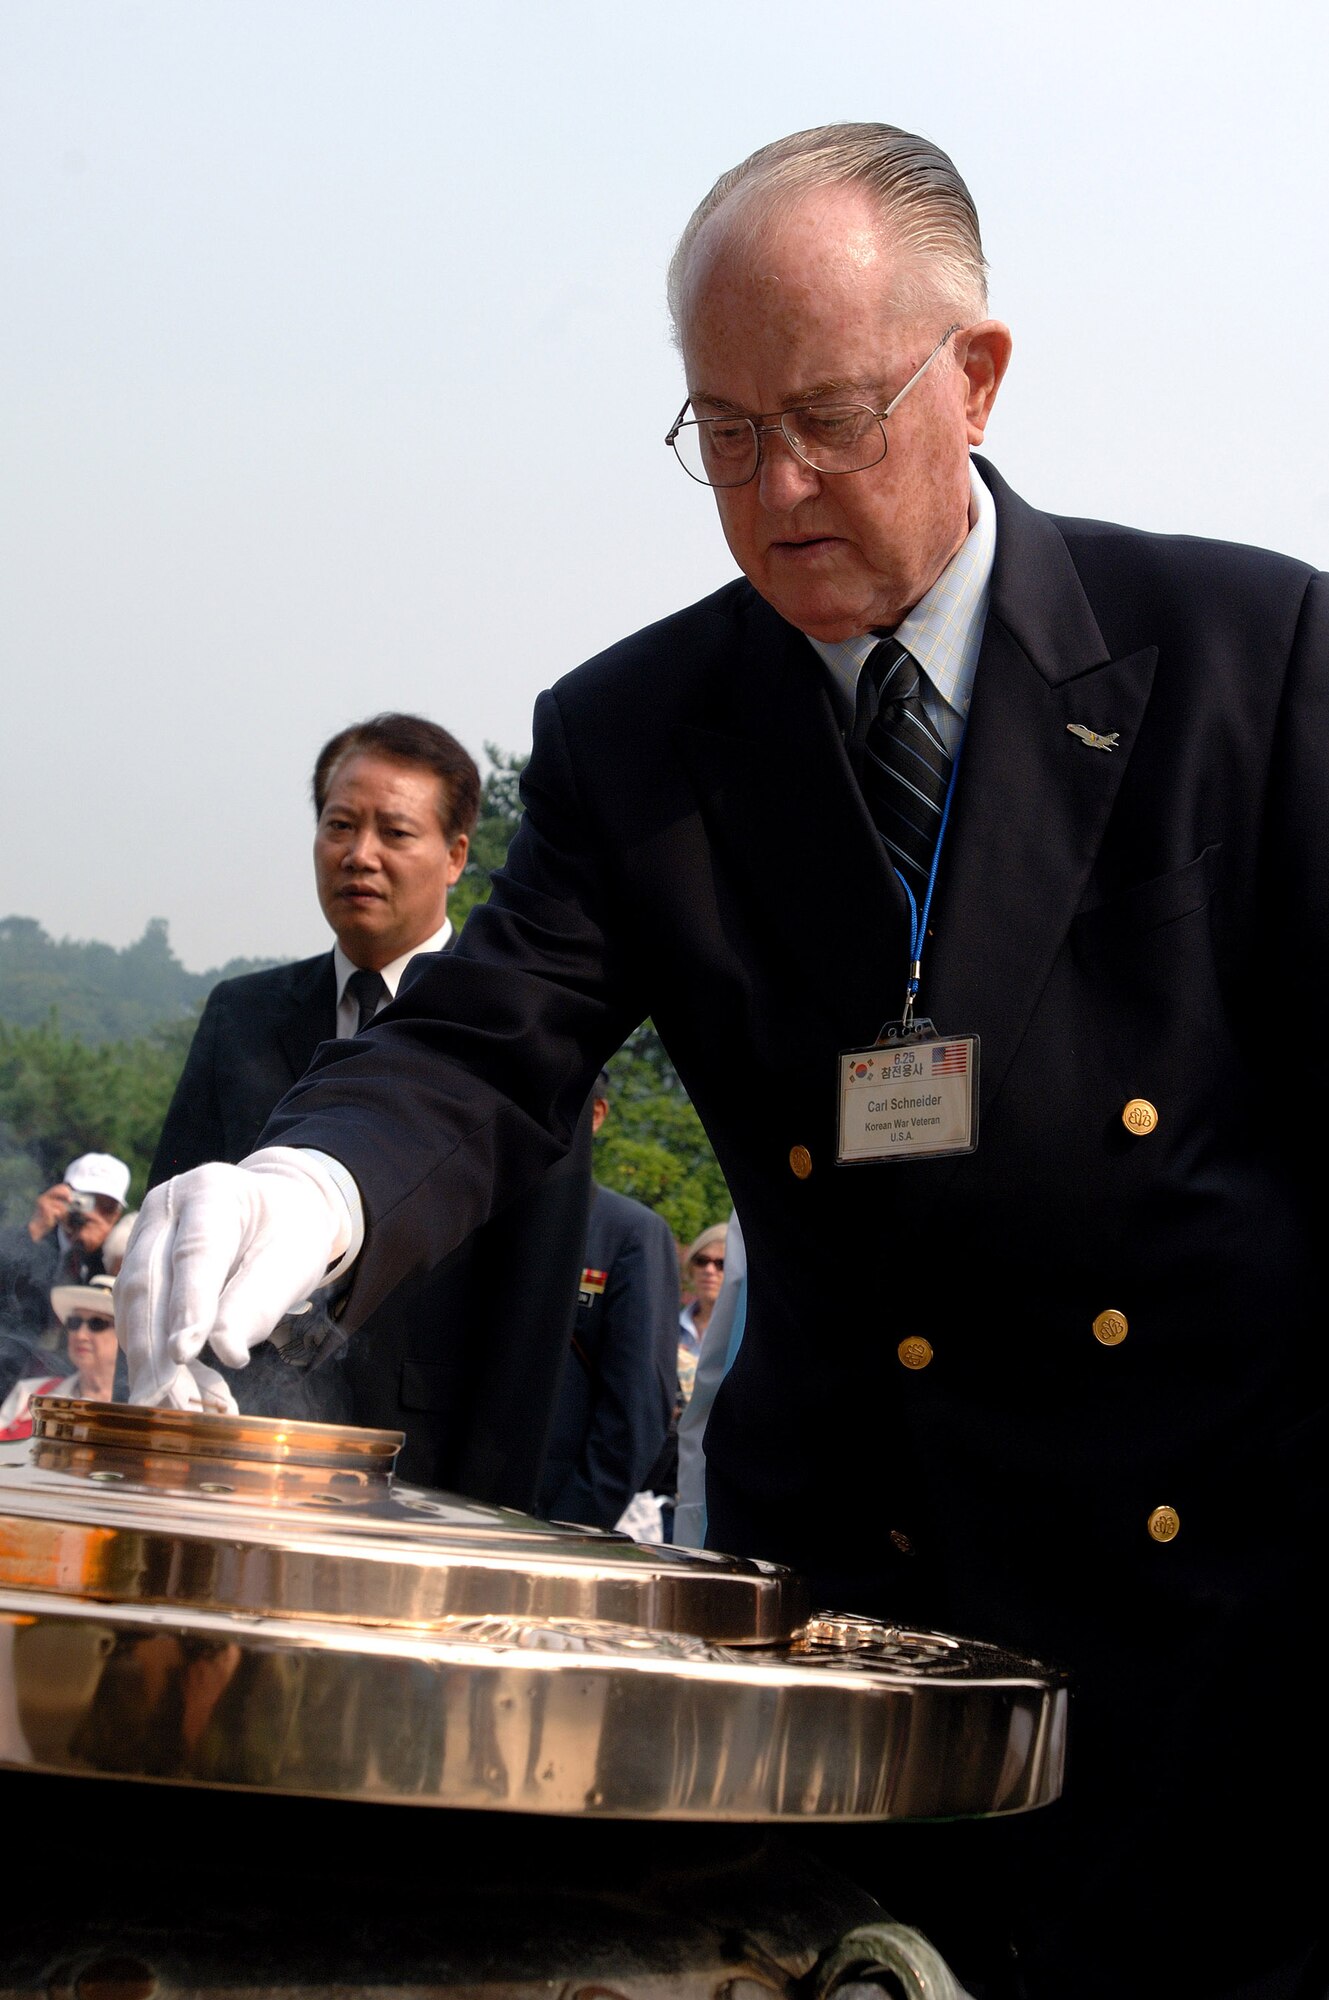 Retired Maj. Gen. Carl G. Schneider pours incense into a flame to honor Korean War veterans during a ceremony at the South Korean National Cemetery Sept. 12. The South Korean government's Revisit Korea program invites war veterans each year to come to South Korea to honor the men and woman from 21 countries who served during the Korean War. Nearly 25,000 veterans have participated in this program since 1975. (U.S. Air Force photo/Staff Sgt. Bennie J. Davis III) 
